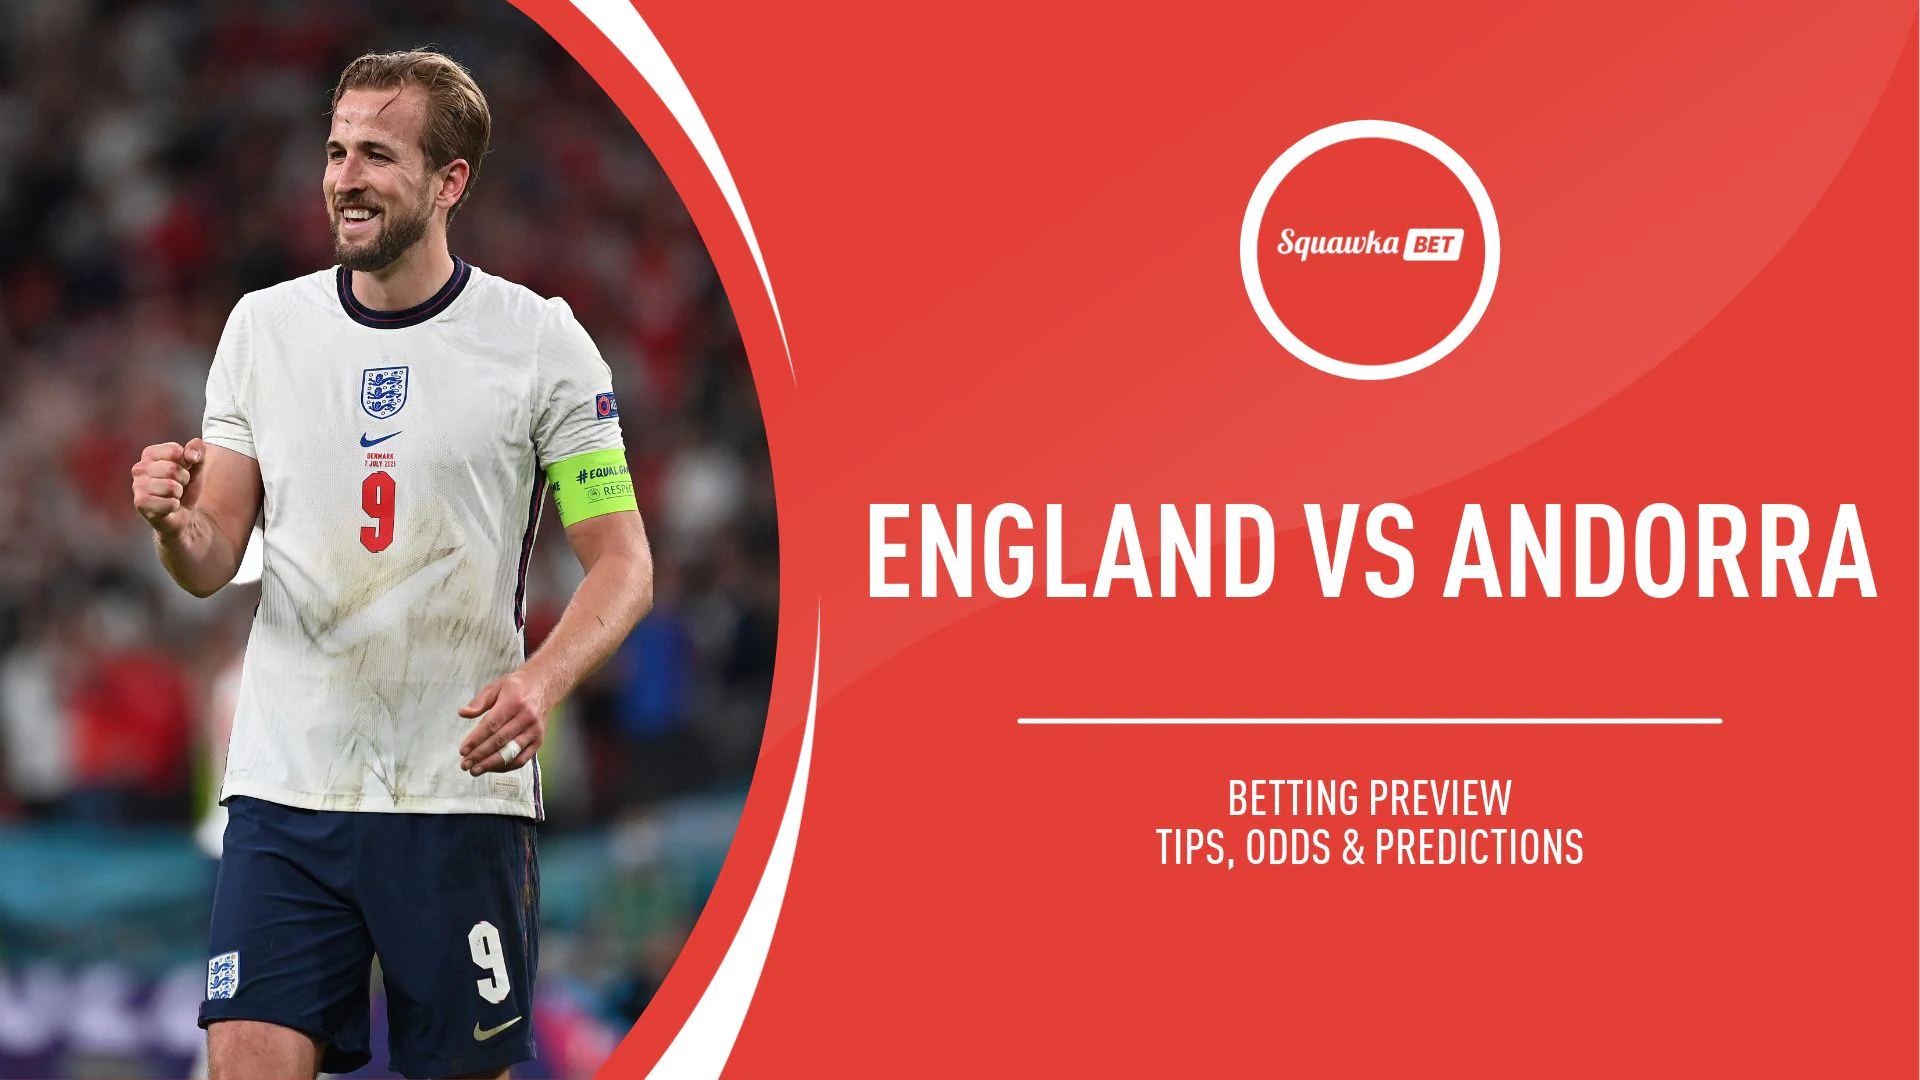 England Vs Andorra Kick-off Time Where to Watch? TV and Live Stream Information!